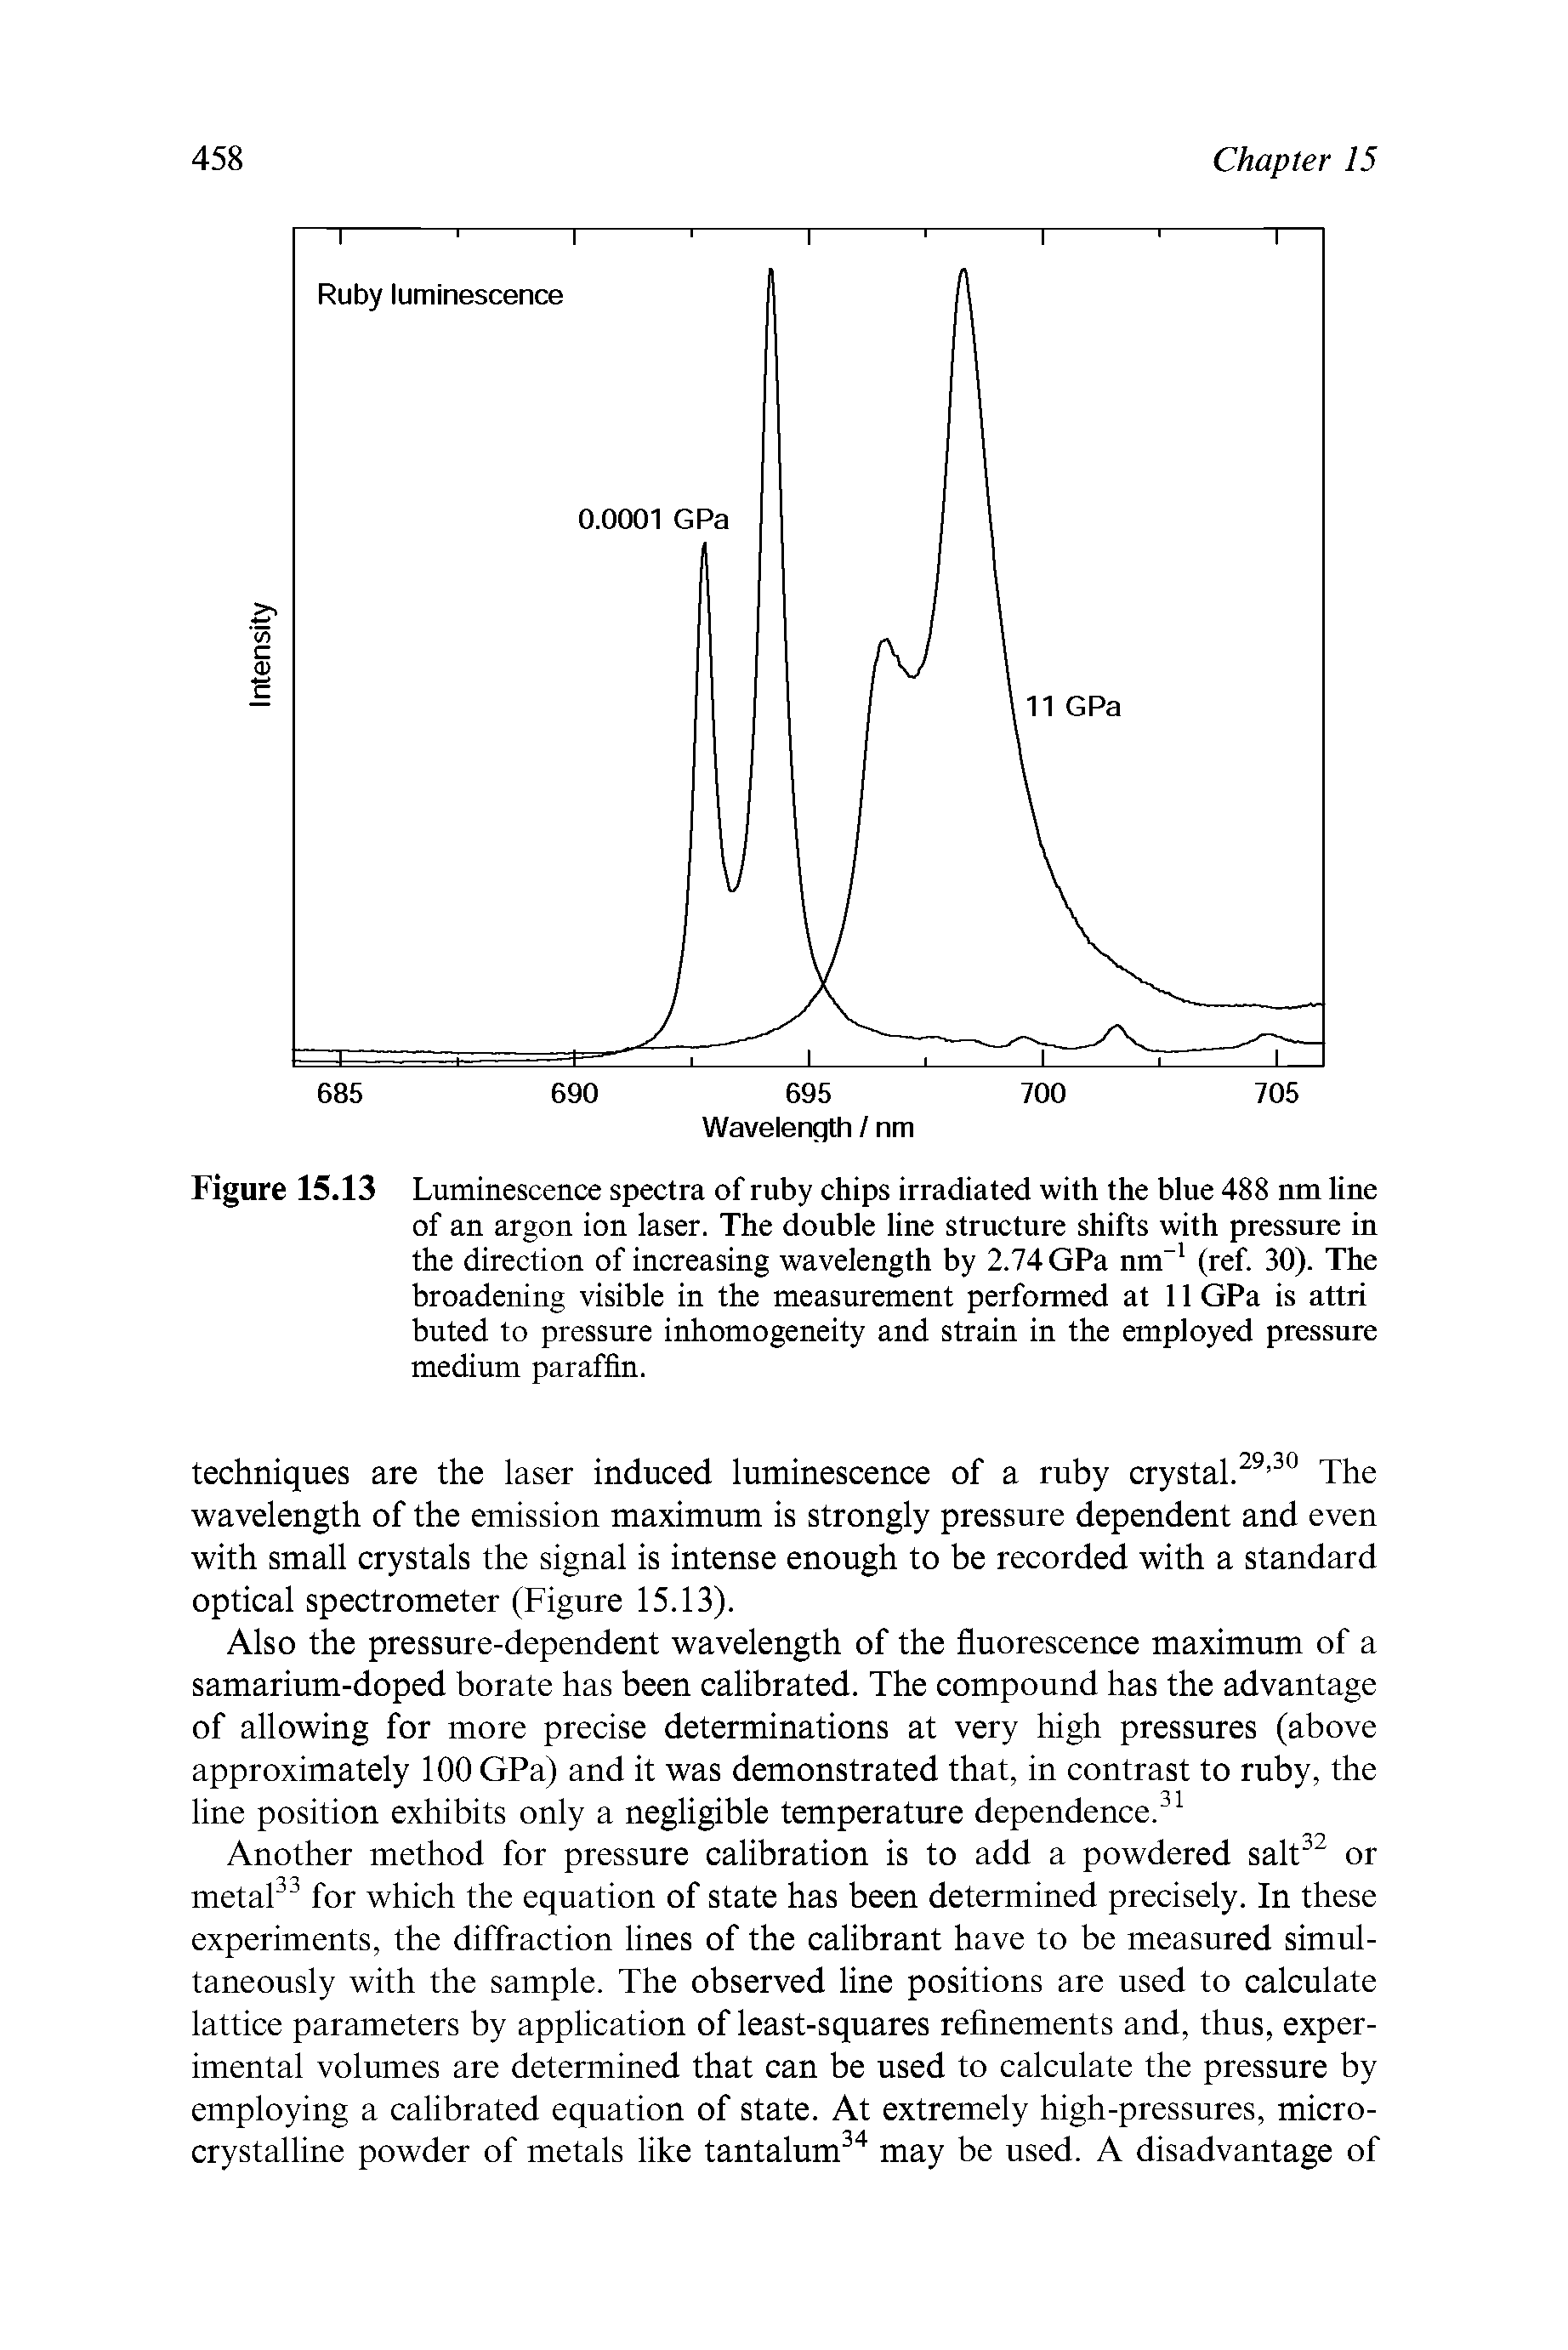 Figure 15.13 Luminescence spectra of ruby chips irradiated with the blue 488 nm line of an argon ion laser. The double line structure shifts with pressure in the direction of increasing wavelength by 2.74 GPa nm (ref 30). The broadening visible in the measurement performed at 11 GPa is attri buted to pressure inhomogeneity and strain in the employed pressure medium paraffin.